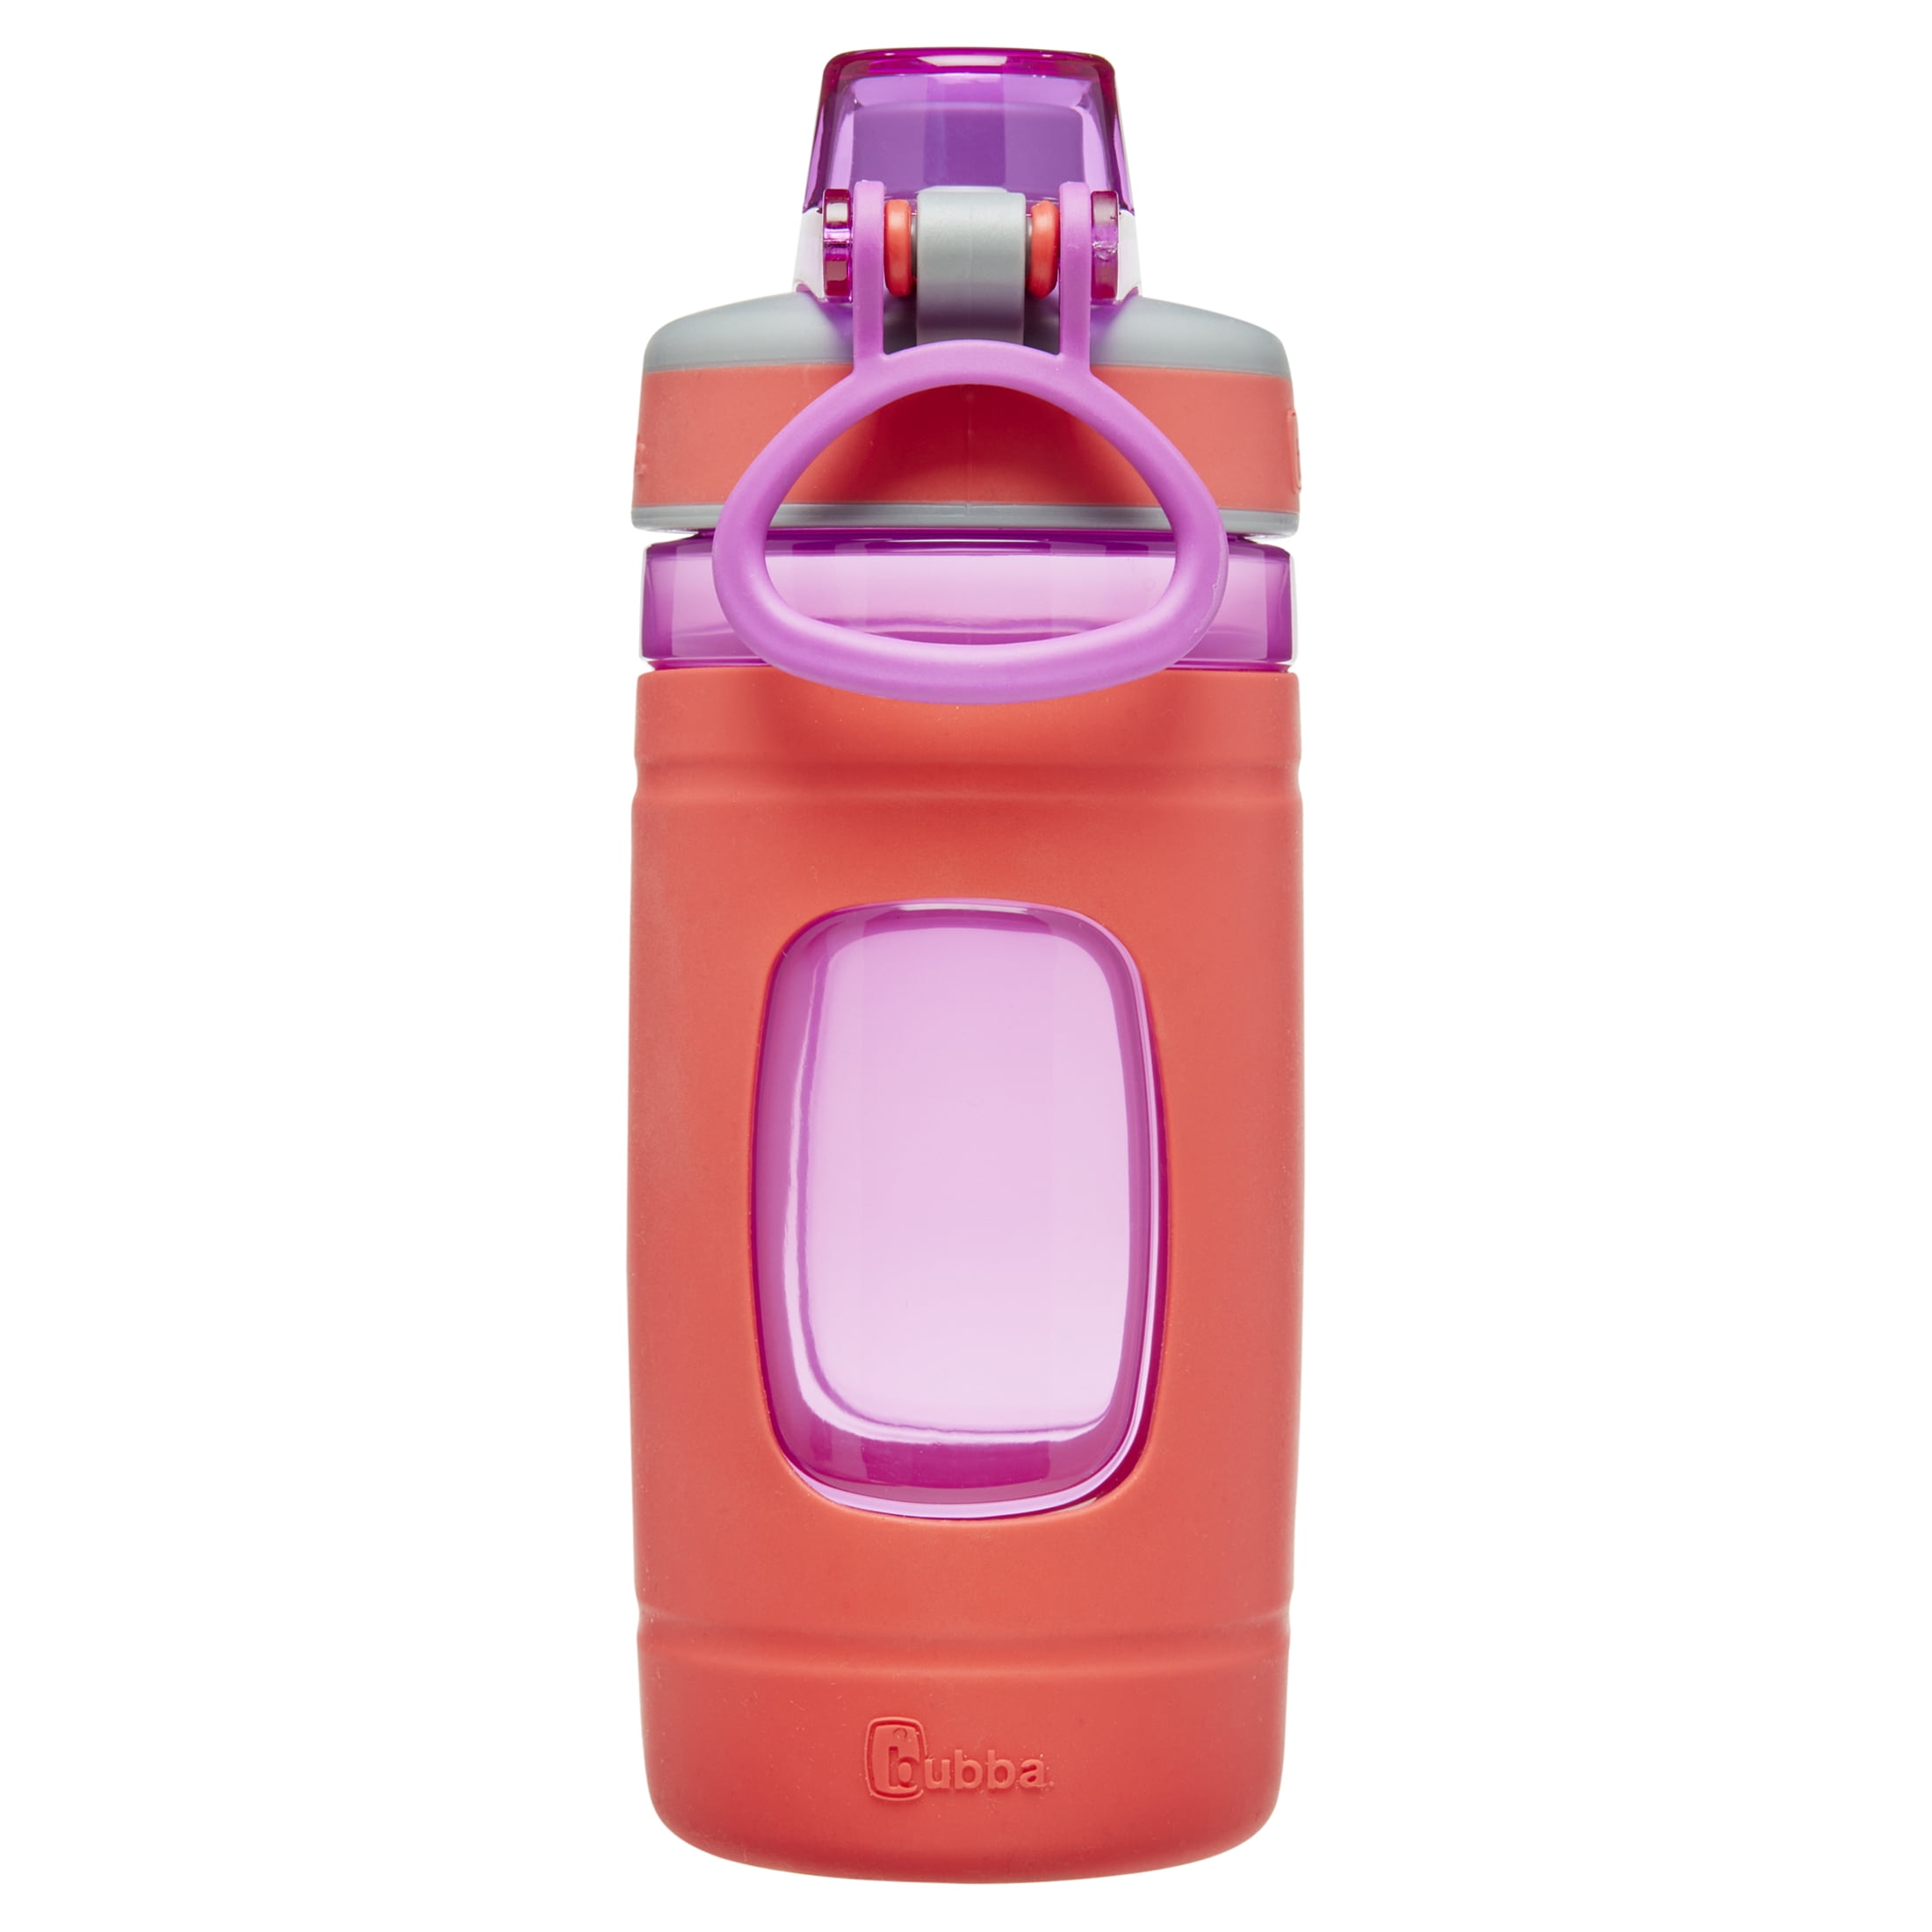 bubba Flo Kids Water Bottle on Sale For $5.00 (was $8.99)!! The Perfect  Leak-Proof Water Bottle! - Passion For Savings